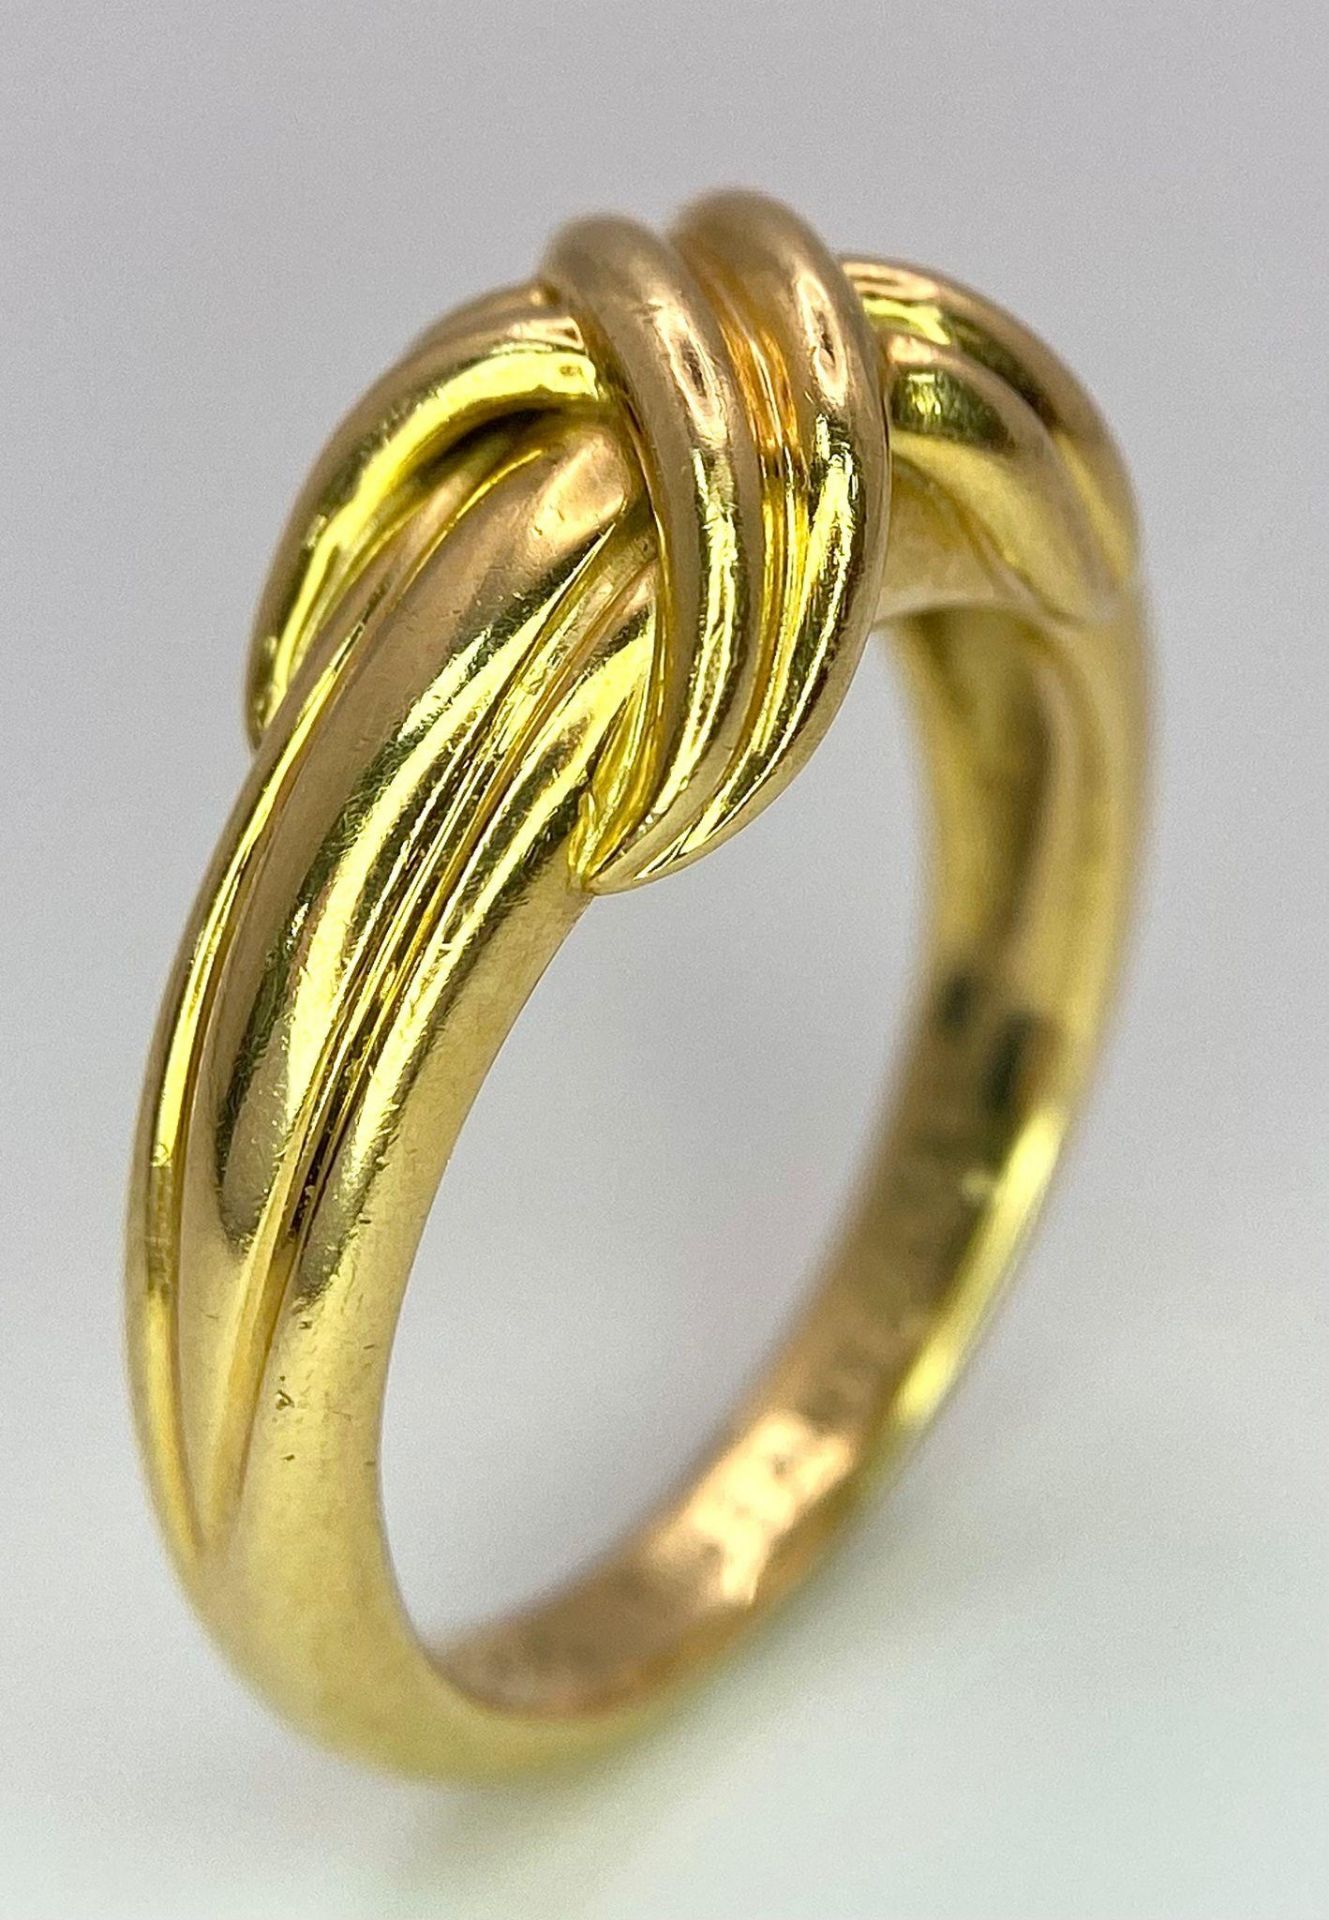 A Beautiful Tiffany and Co. 18K Gold Love Ring. Tiffany and co. markings. Size N. 7.2g weight. - Image 6 of 10